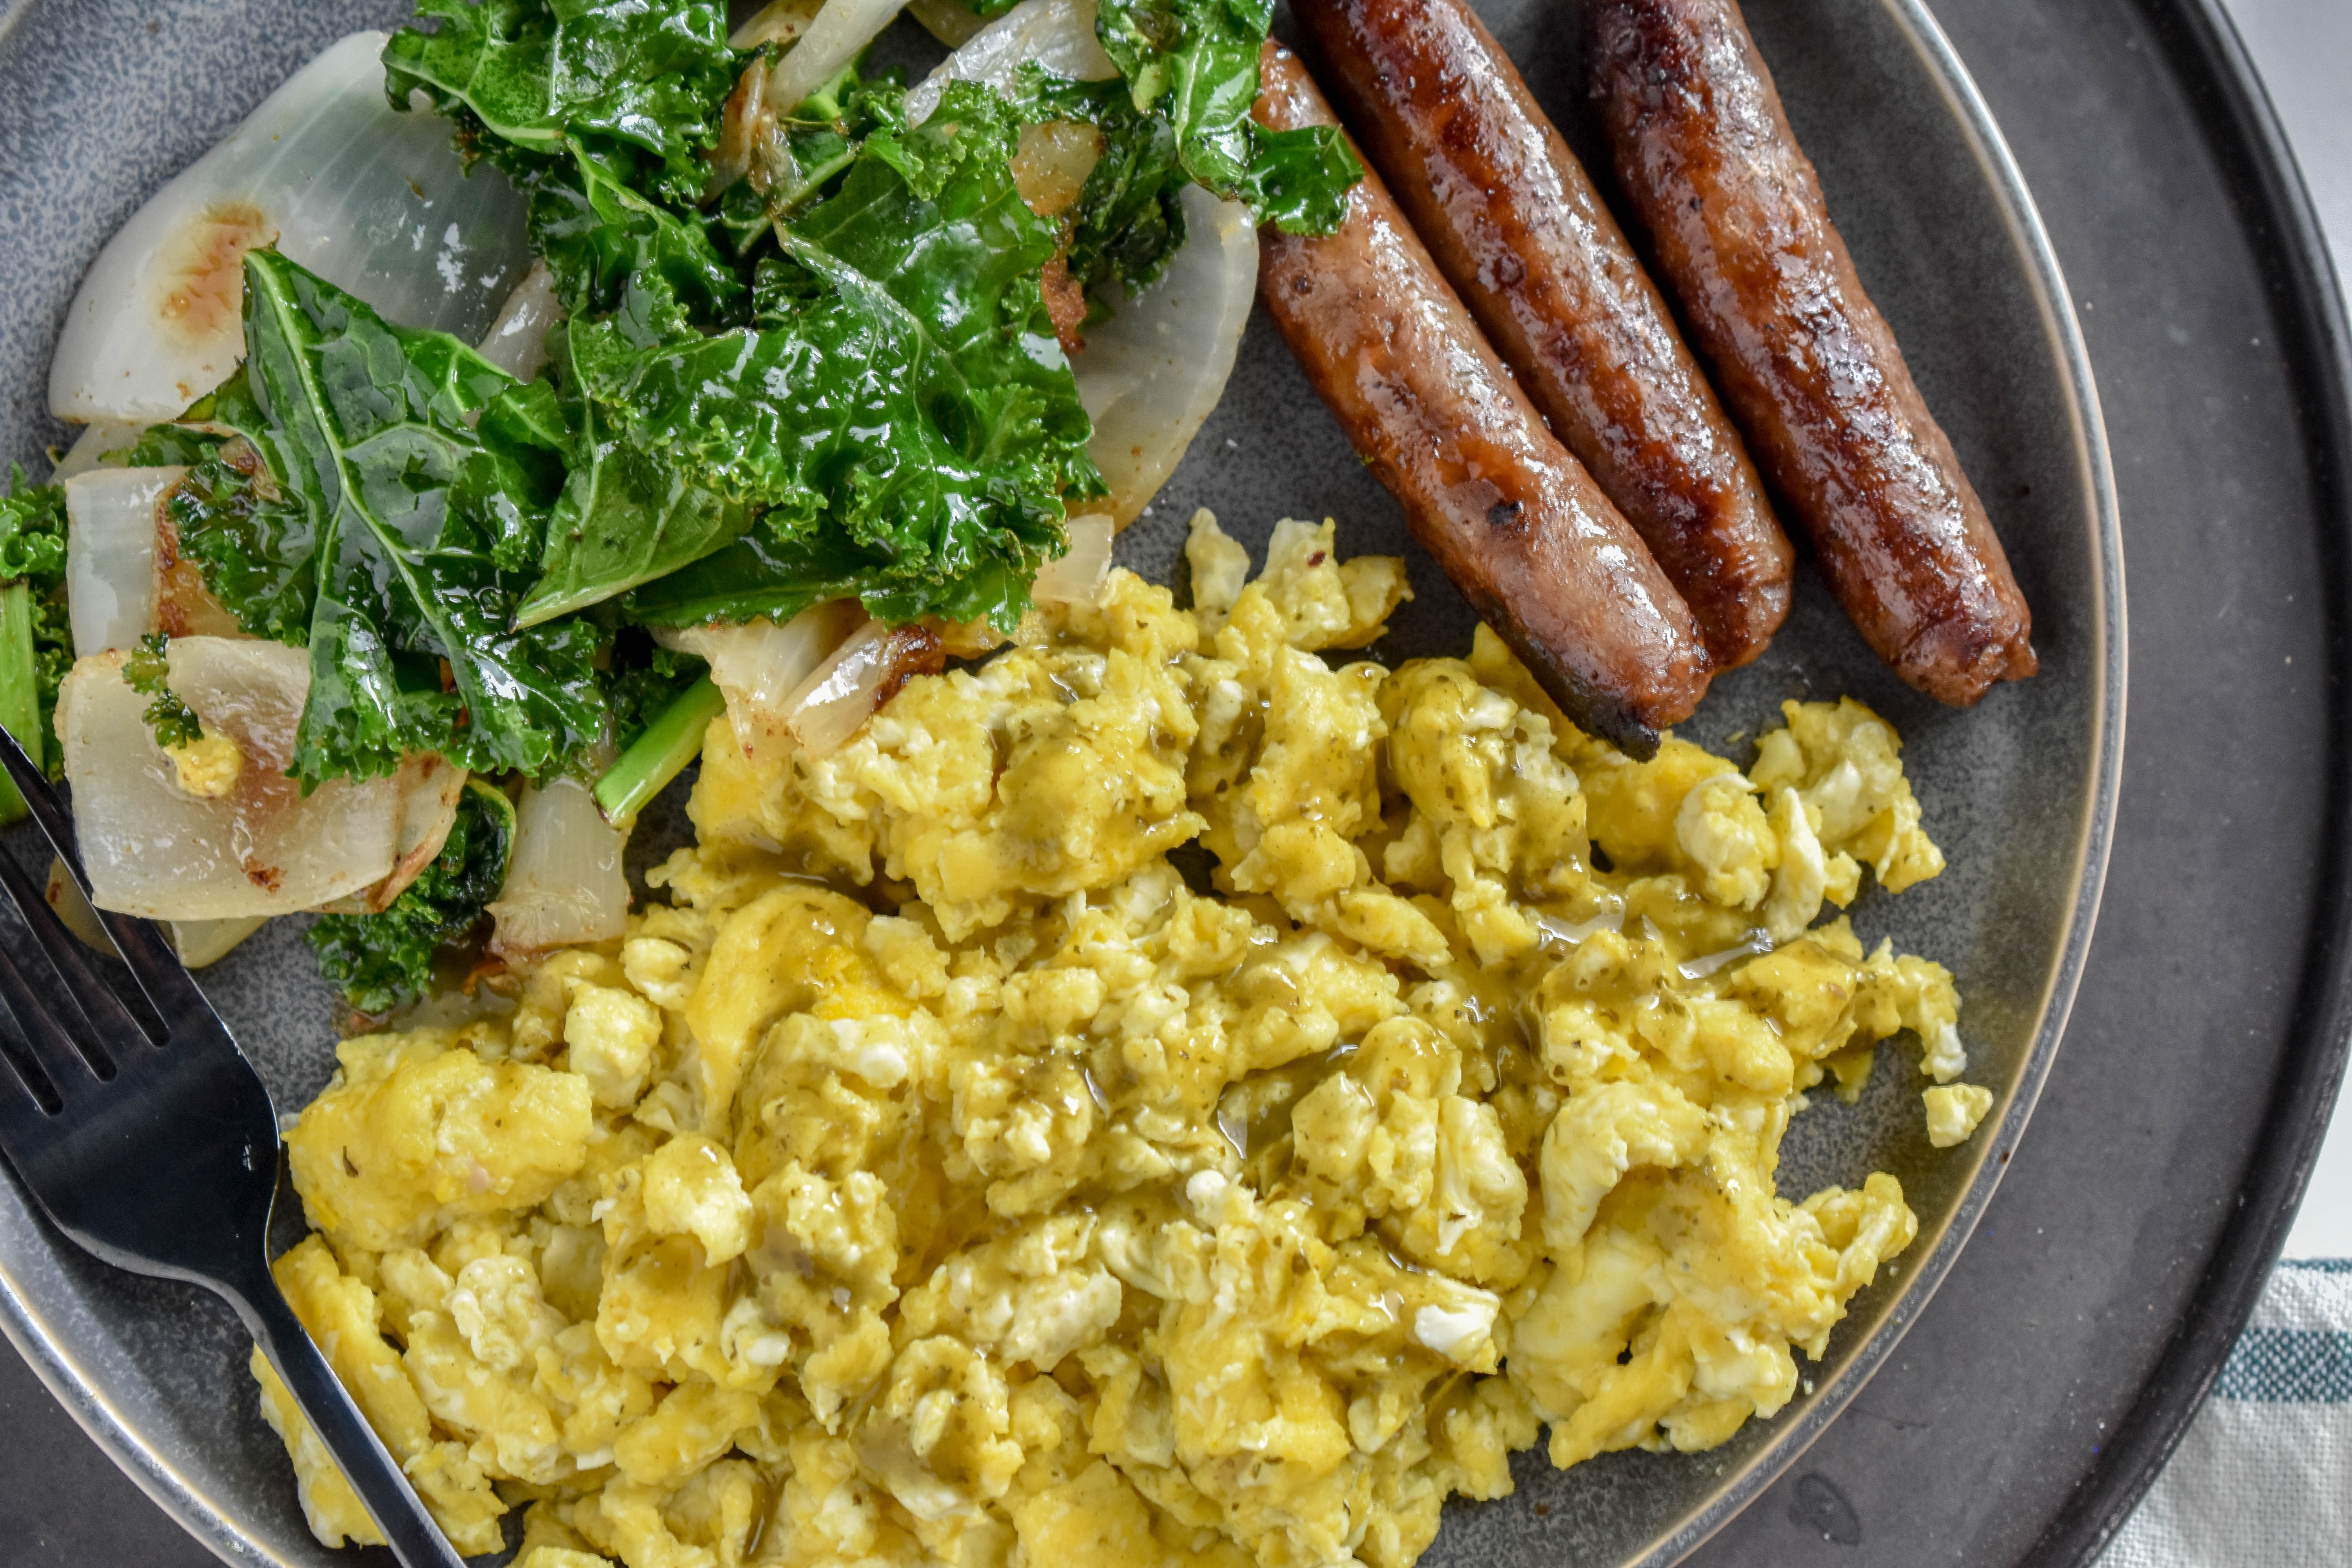 Clean Eating Breakfast with scrambled eggs, sausage links and sauteed kale and onions on a grey plate.